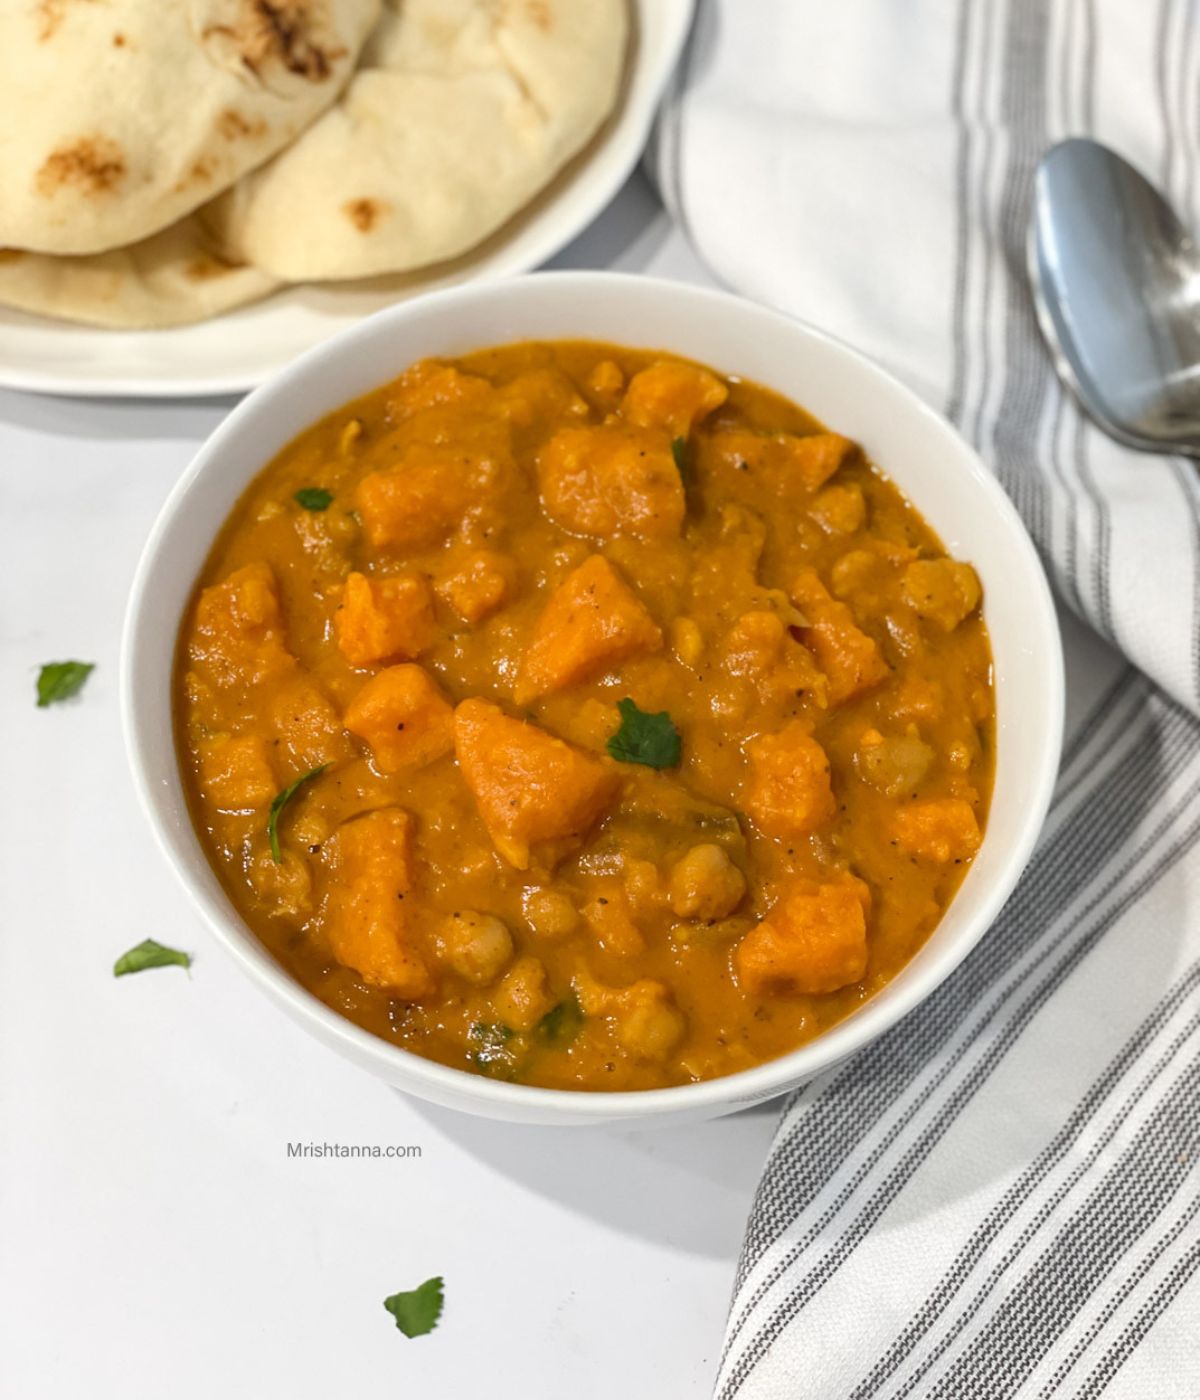 A bowl of Instant pot sweet potato curry is on the table along with a plate of naan.